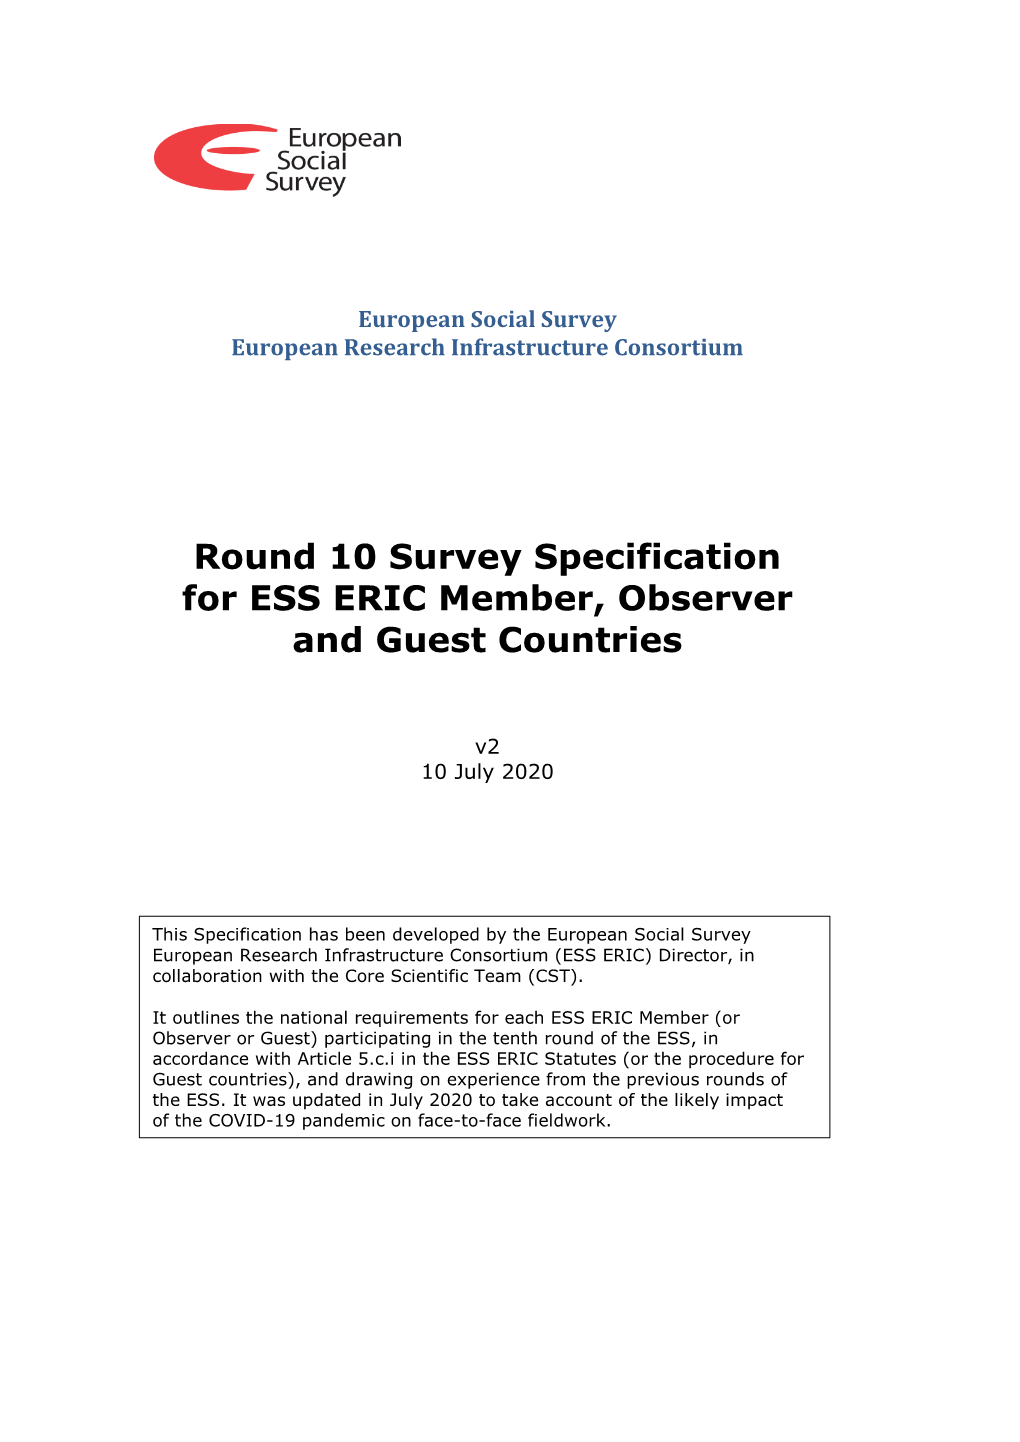 Round 10 Survey Specification for ESS ERIC Member, Observer and Guest Countries